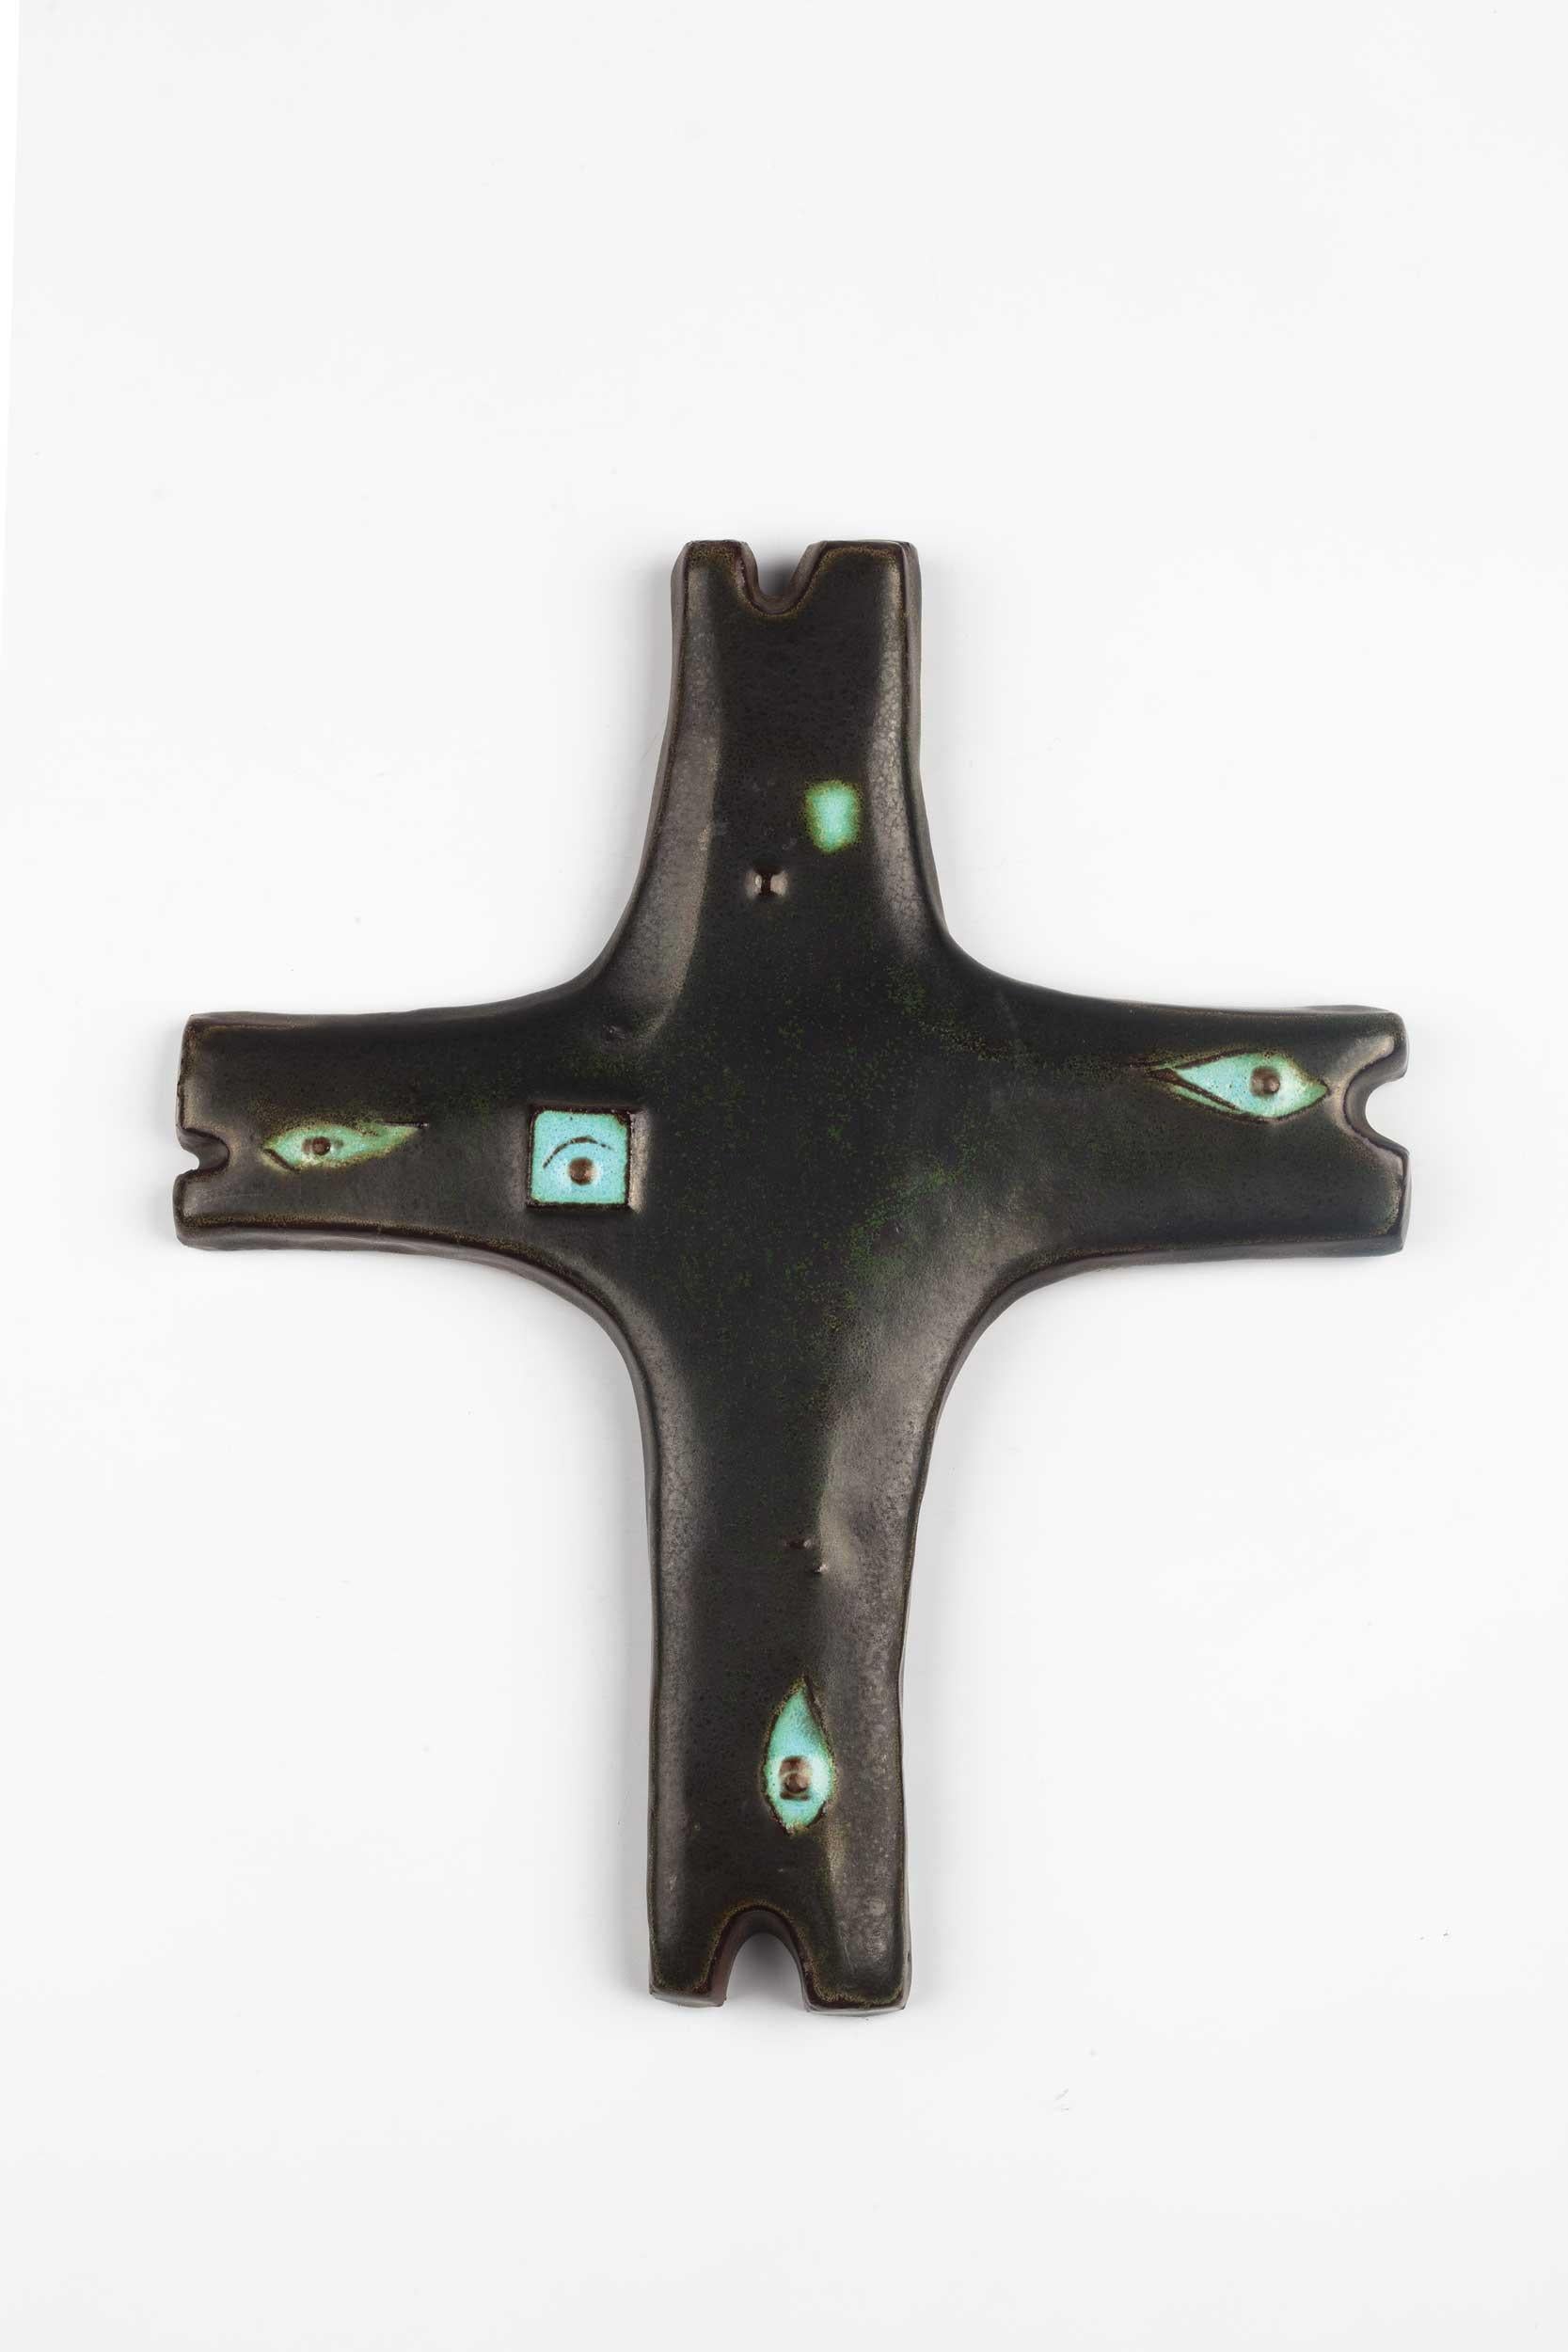 Belgian wall cross in ceramic, hand painted in semi-gloss earthy black with decorative turquoise colored eye shapes throughout. 

From modernism to brutalism, the crosses in our collection range from being as futurist as a modernist church to as